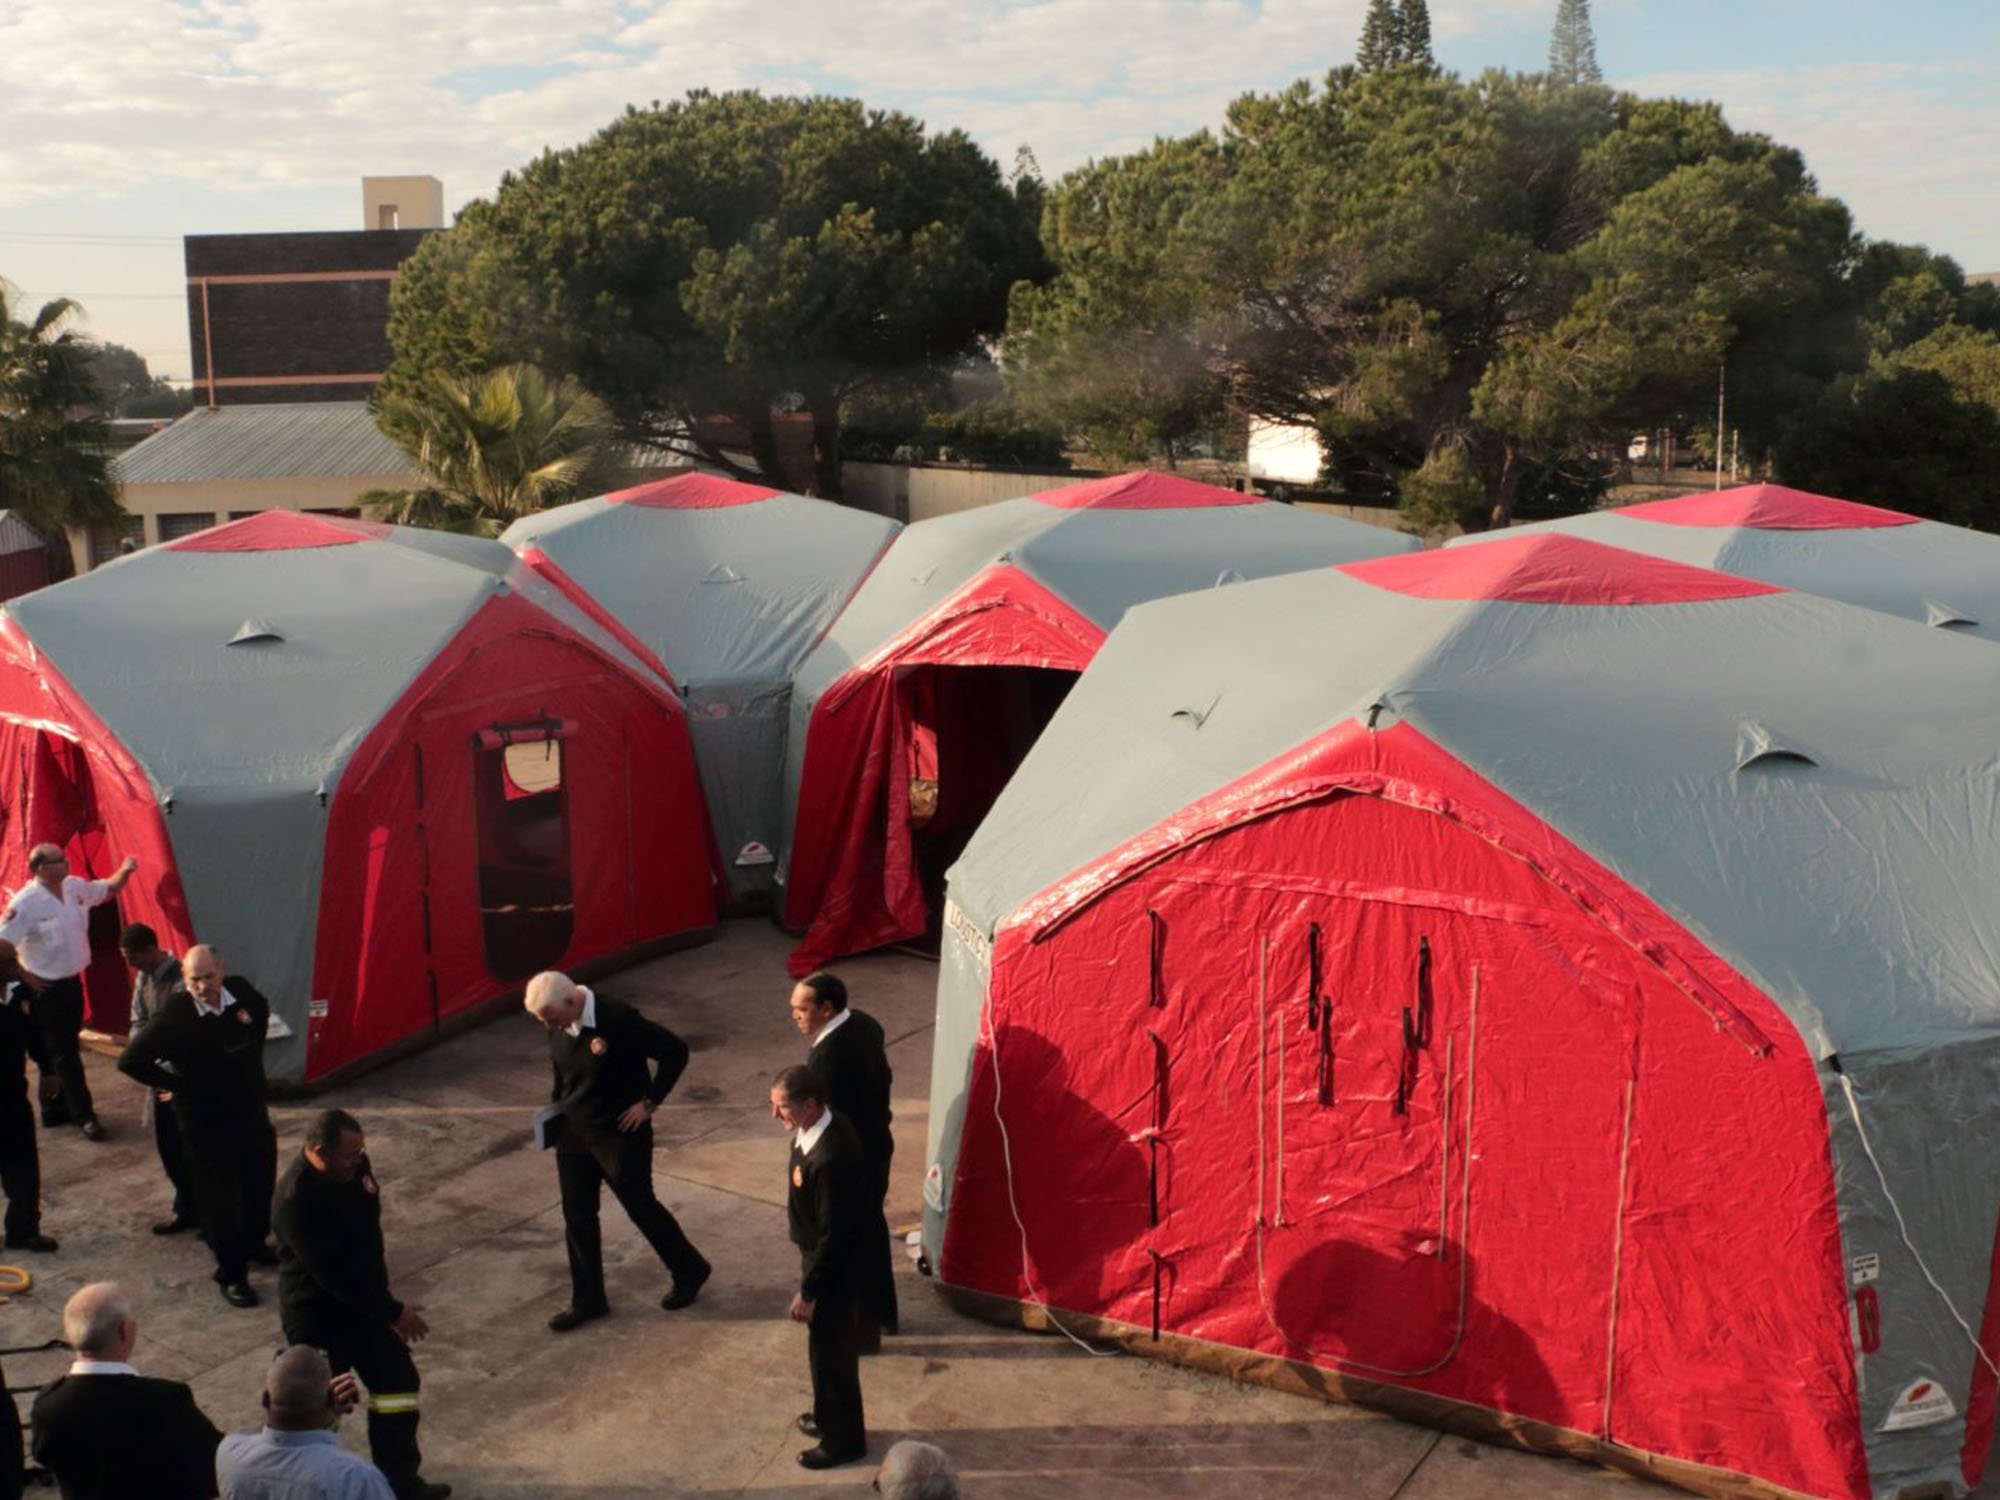 These X-frame emergency shelters are being used as mobile command centres.